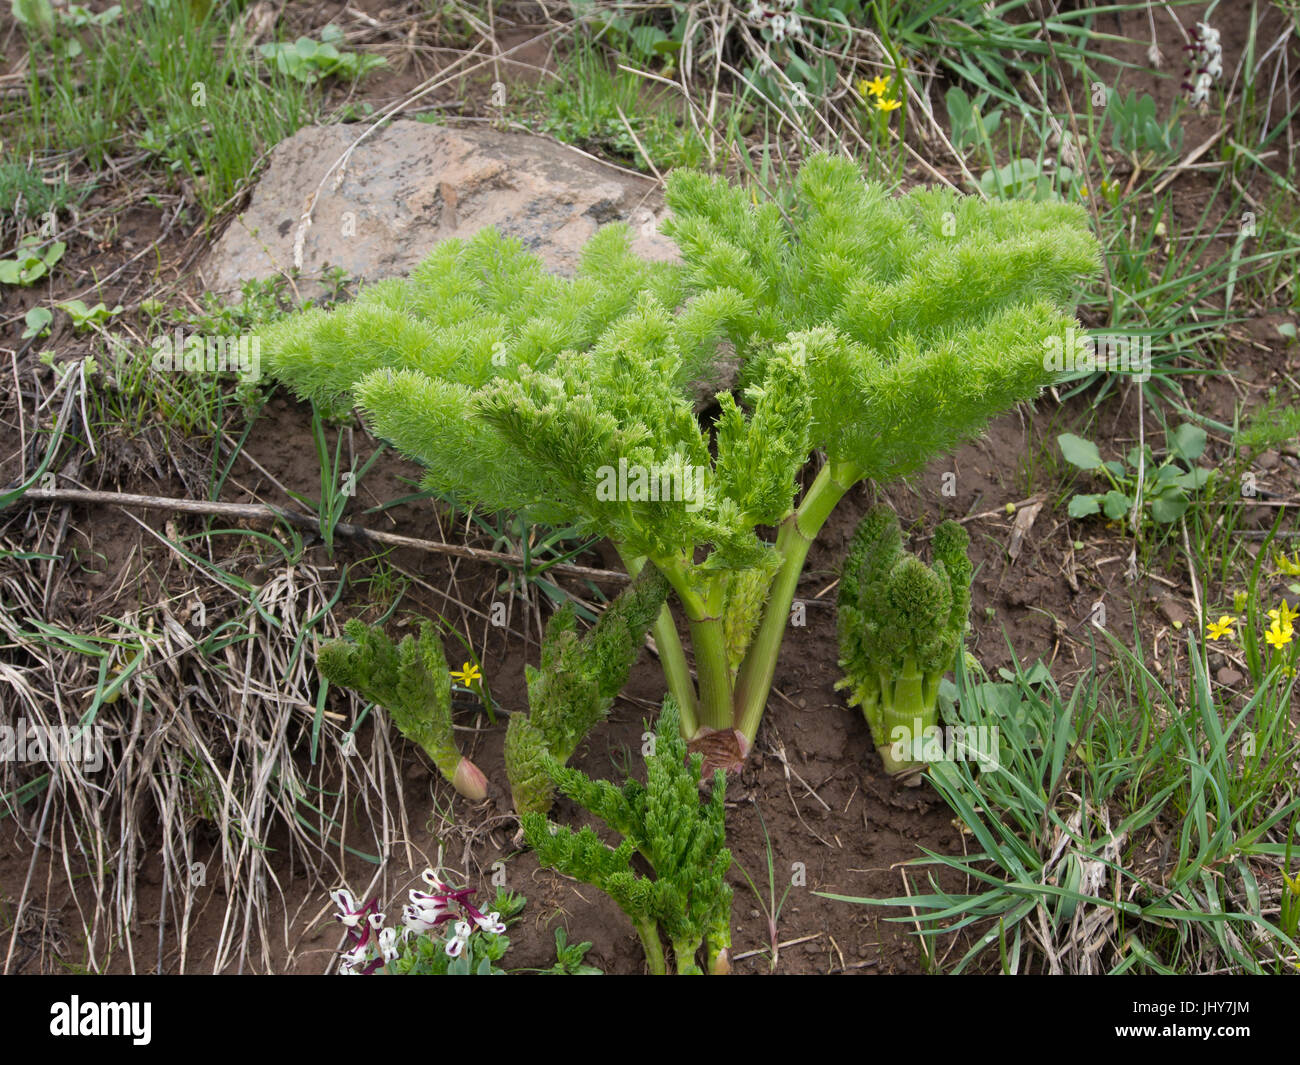 Springtime in the Armenian mountains on the slopes of mountaragats,, fresh green leave from a plant in the Ferula family, possibly Ferula szowitsiana Stock Photo